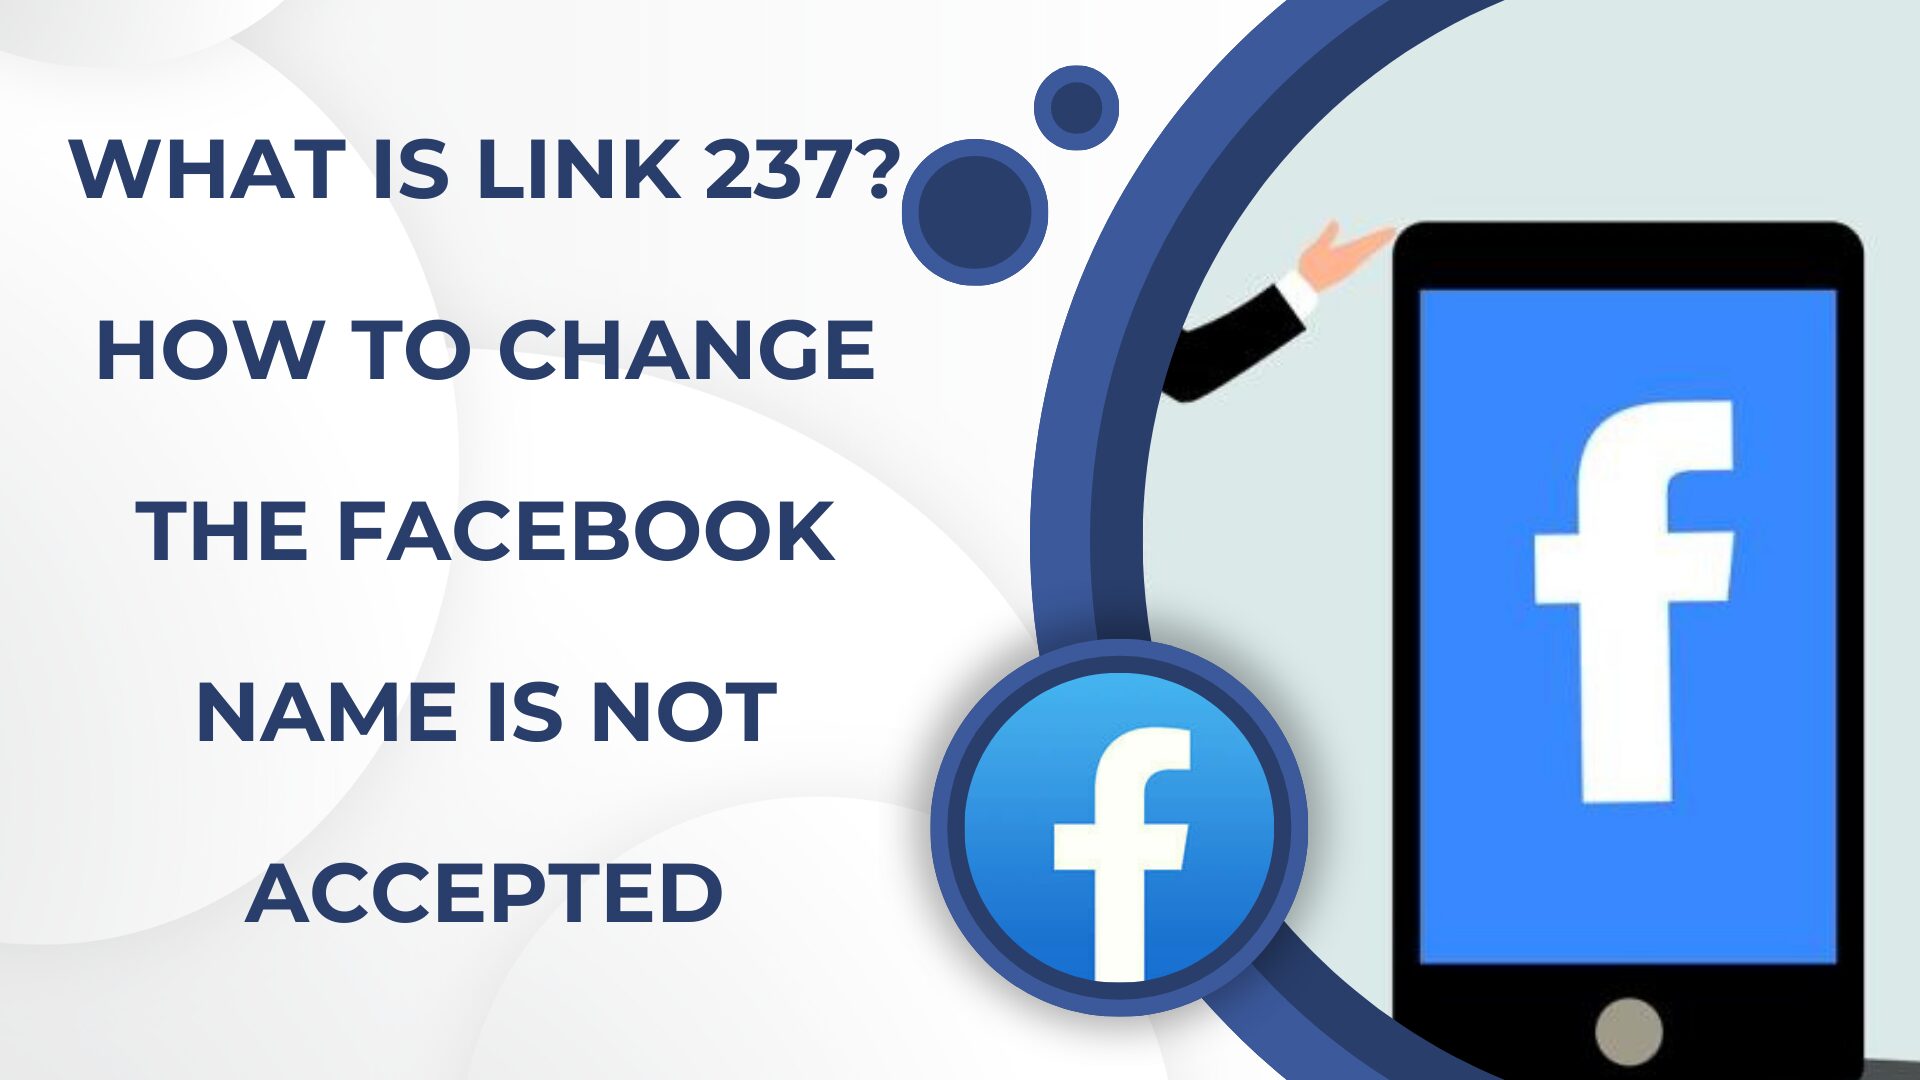 What is Link 237?